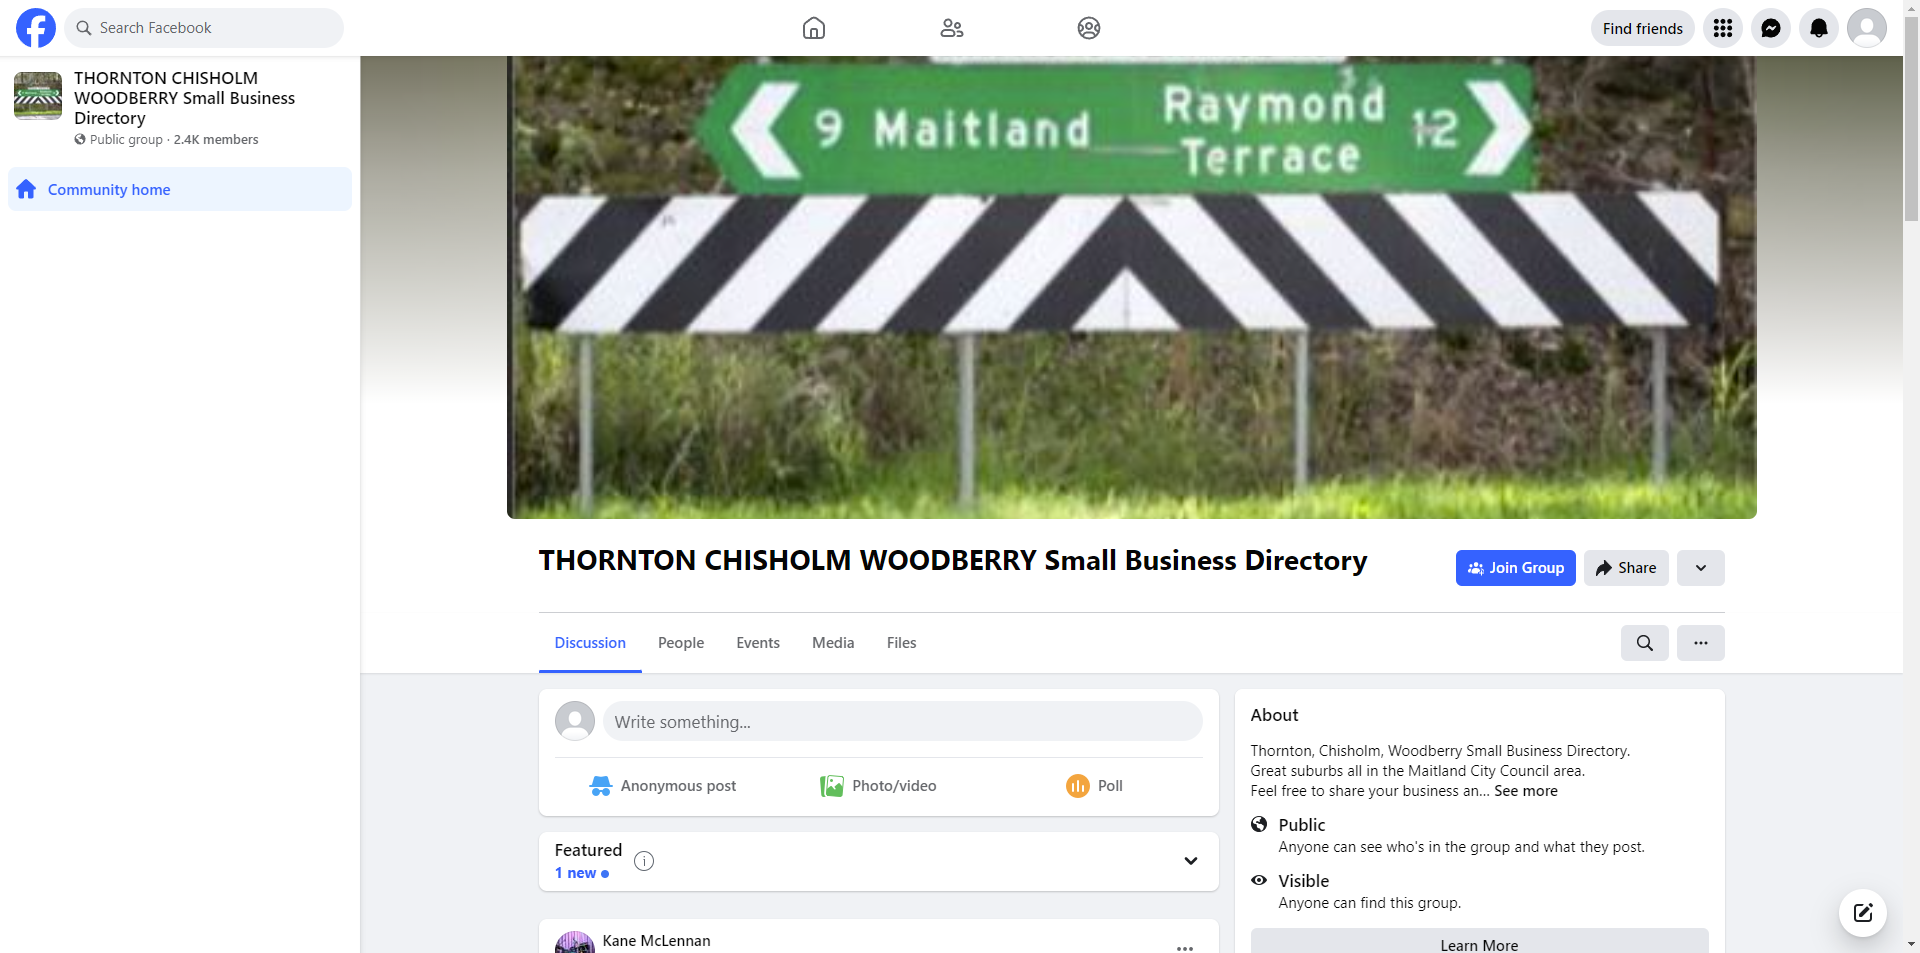 Thornton Chisholm Woodberry Small Business Directory